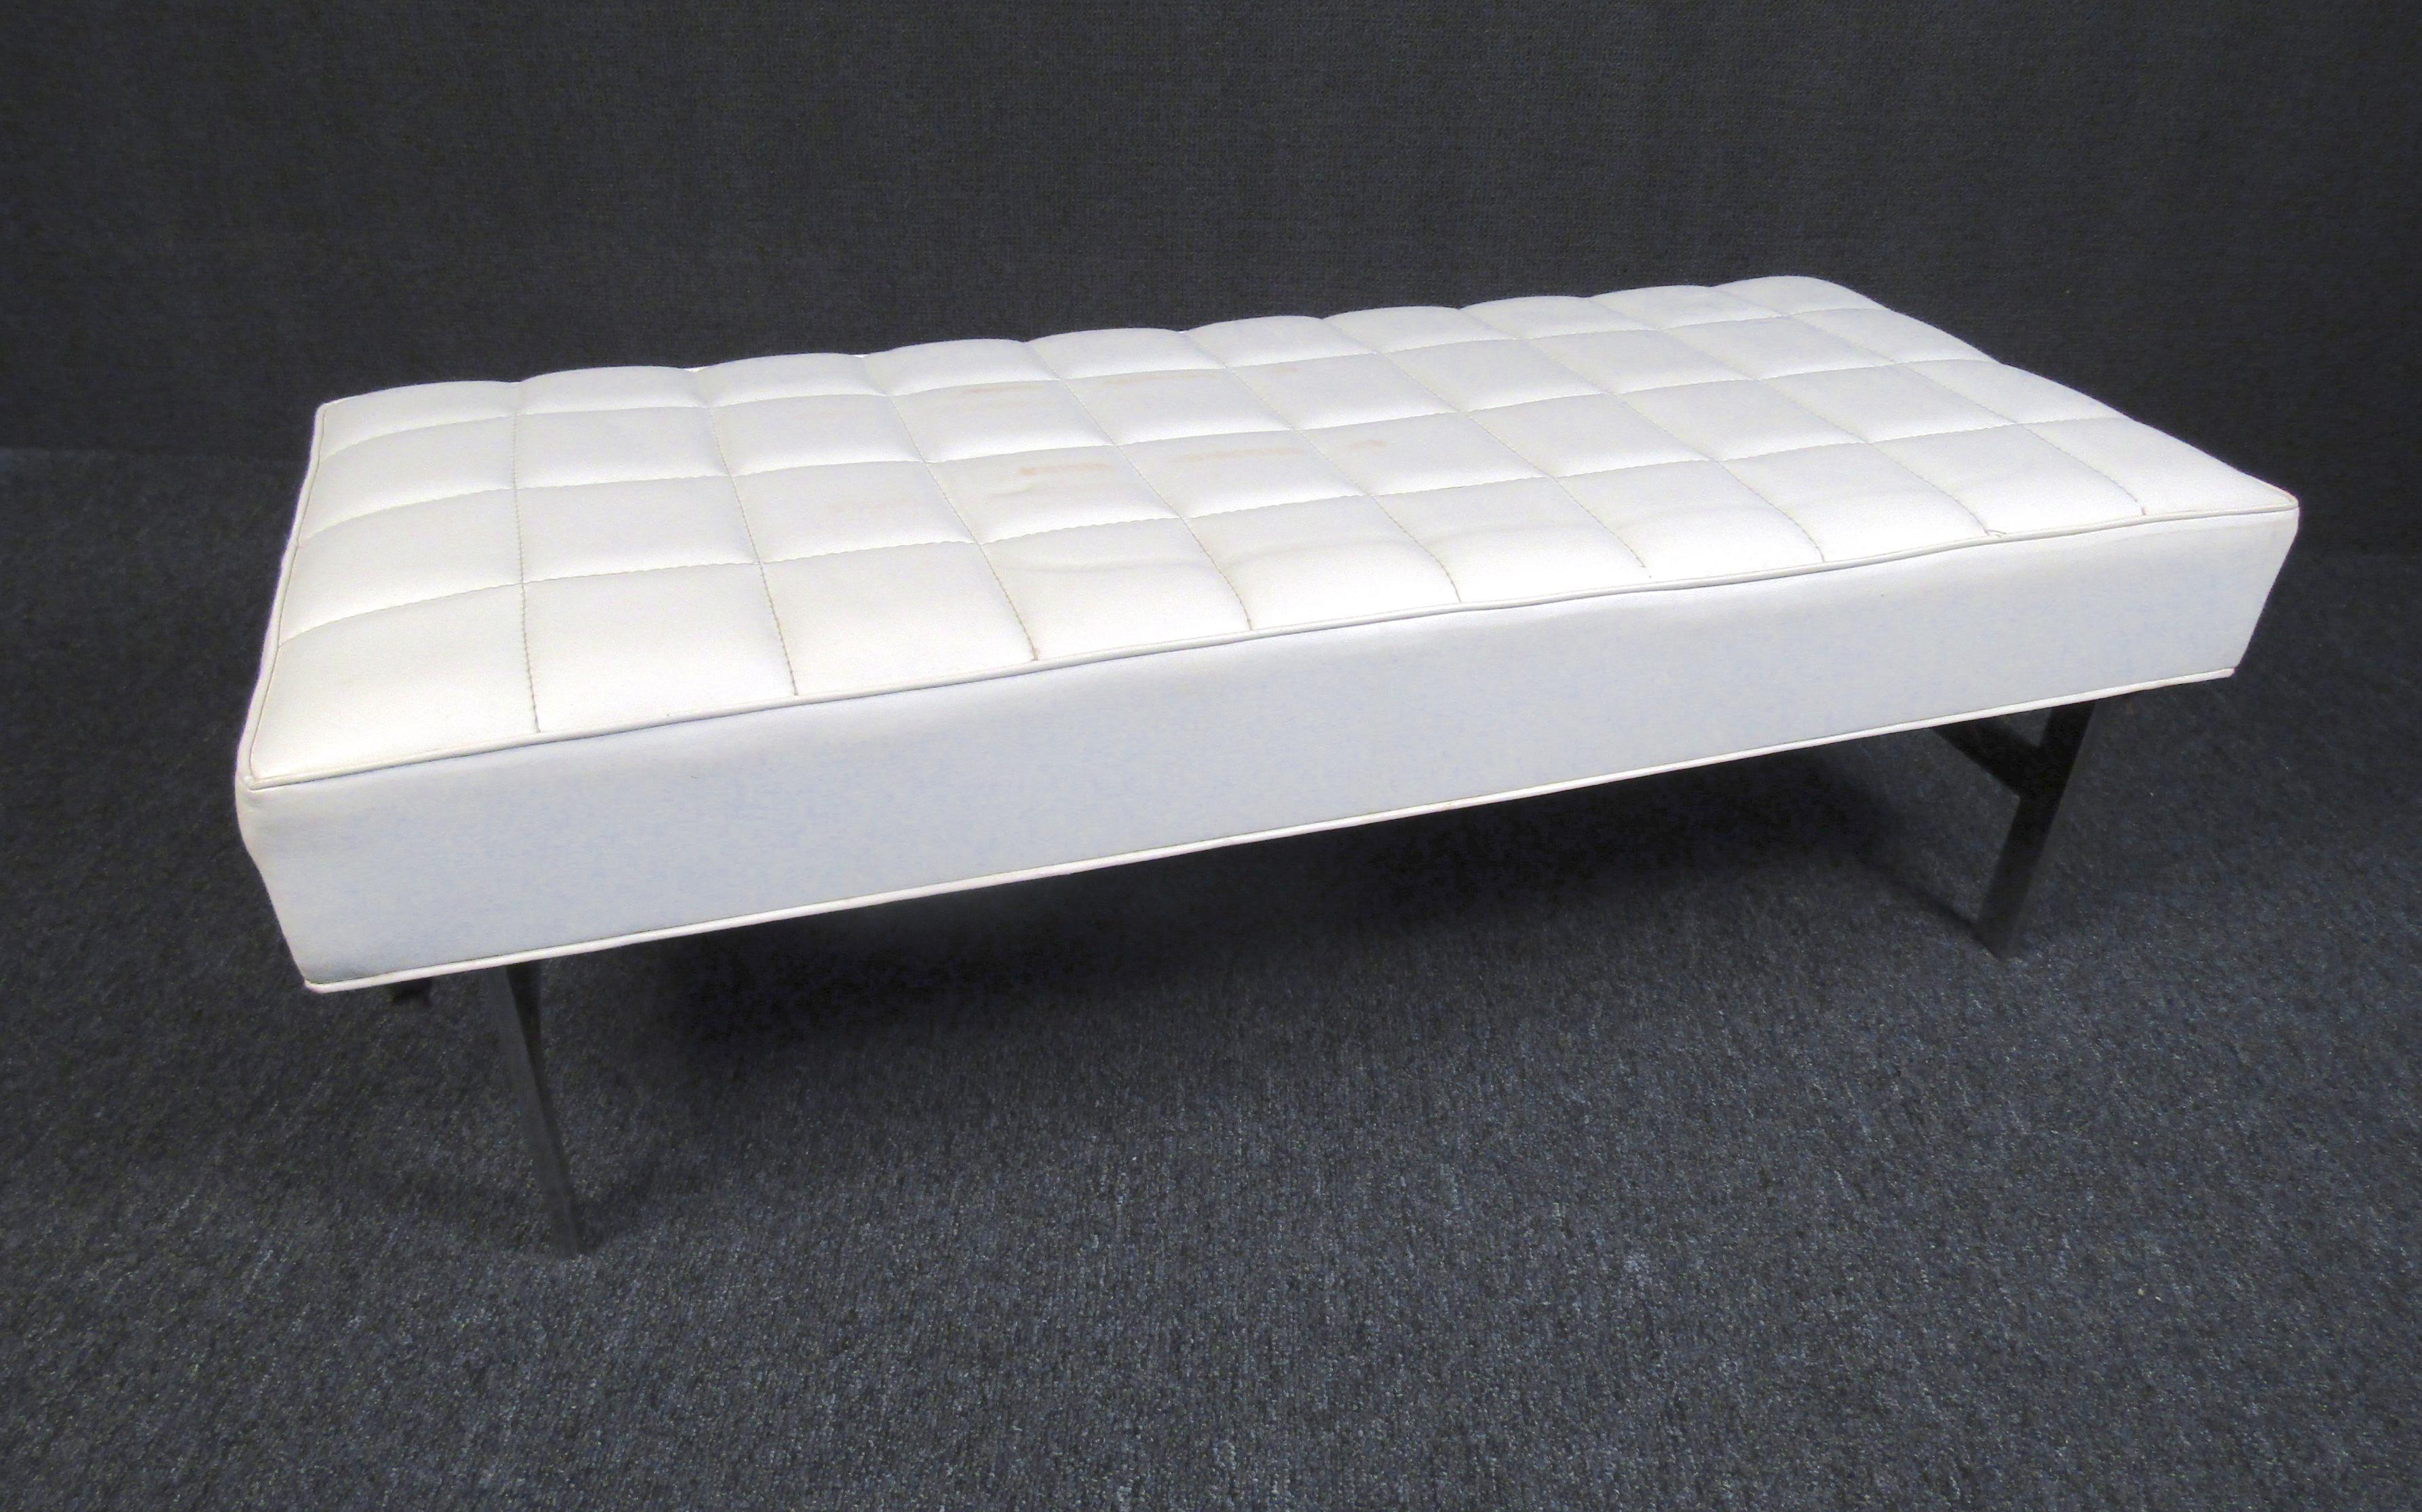 This elegant Mid-Century Modern bench is sure to stand out in the entryway to a room or living space. A comfortable white leather surface provides durability and a sleek look while being supported by chrome legs. Stylish, simple, and sophisticated,